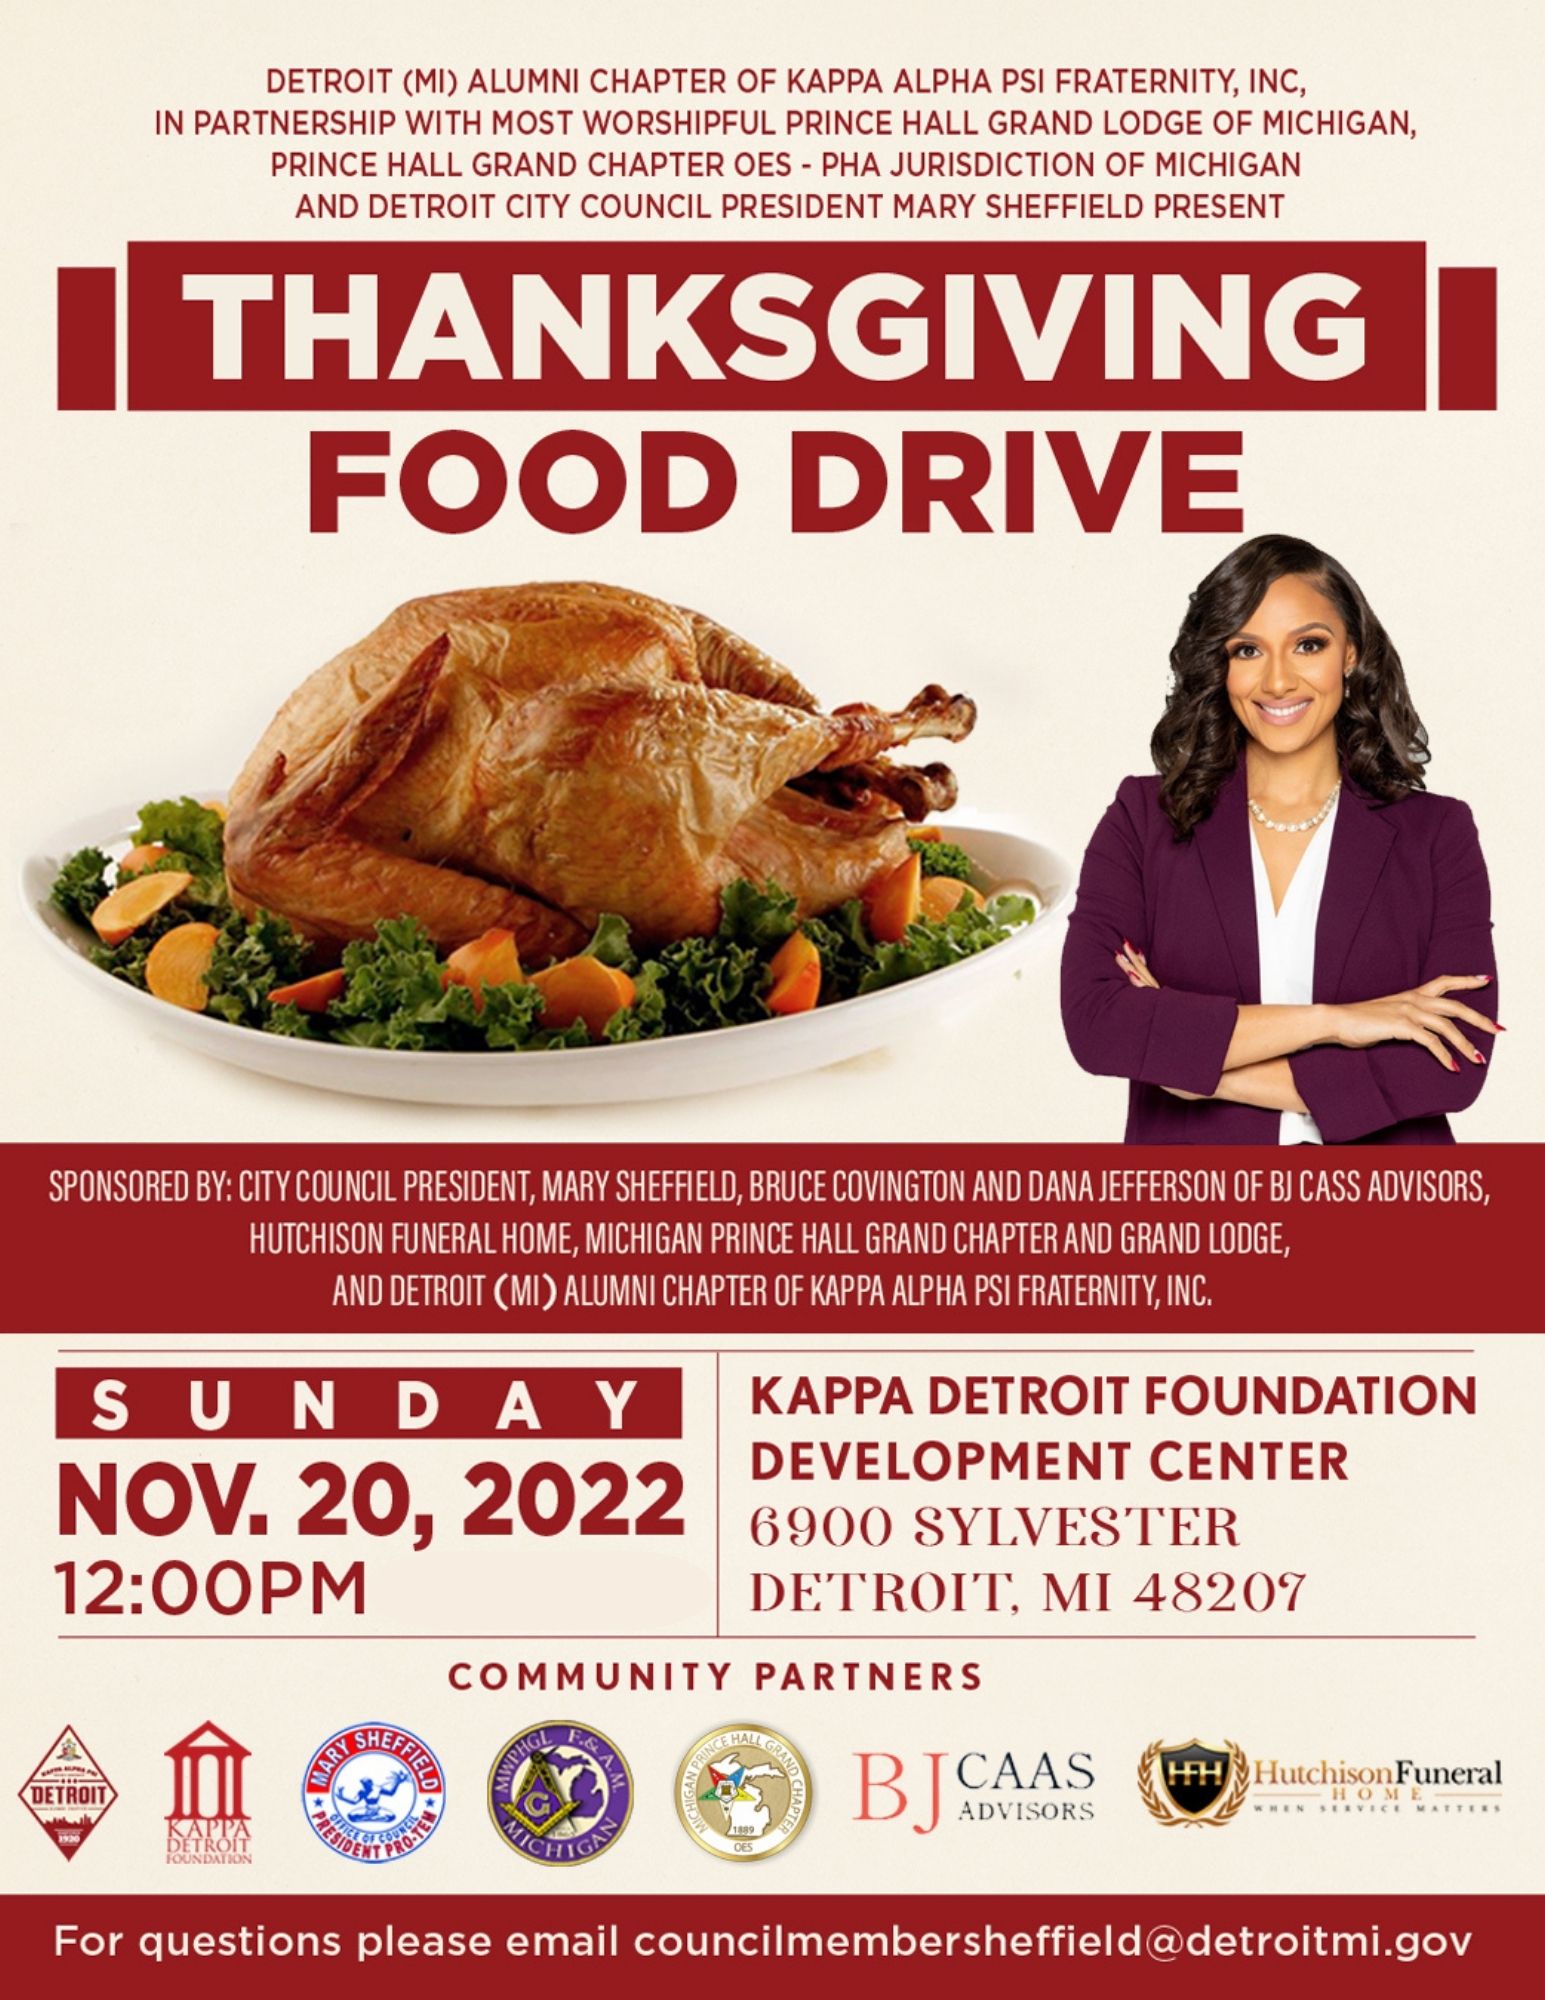 Council President Sheffield to Host Turkey Giveaway on Sunday, November 20th at 12 pm!